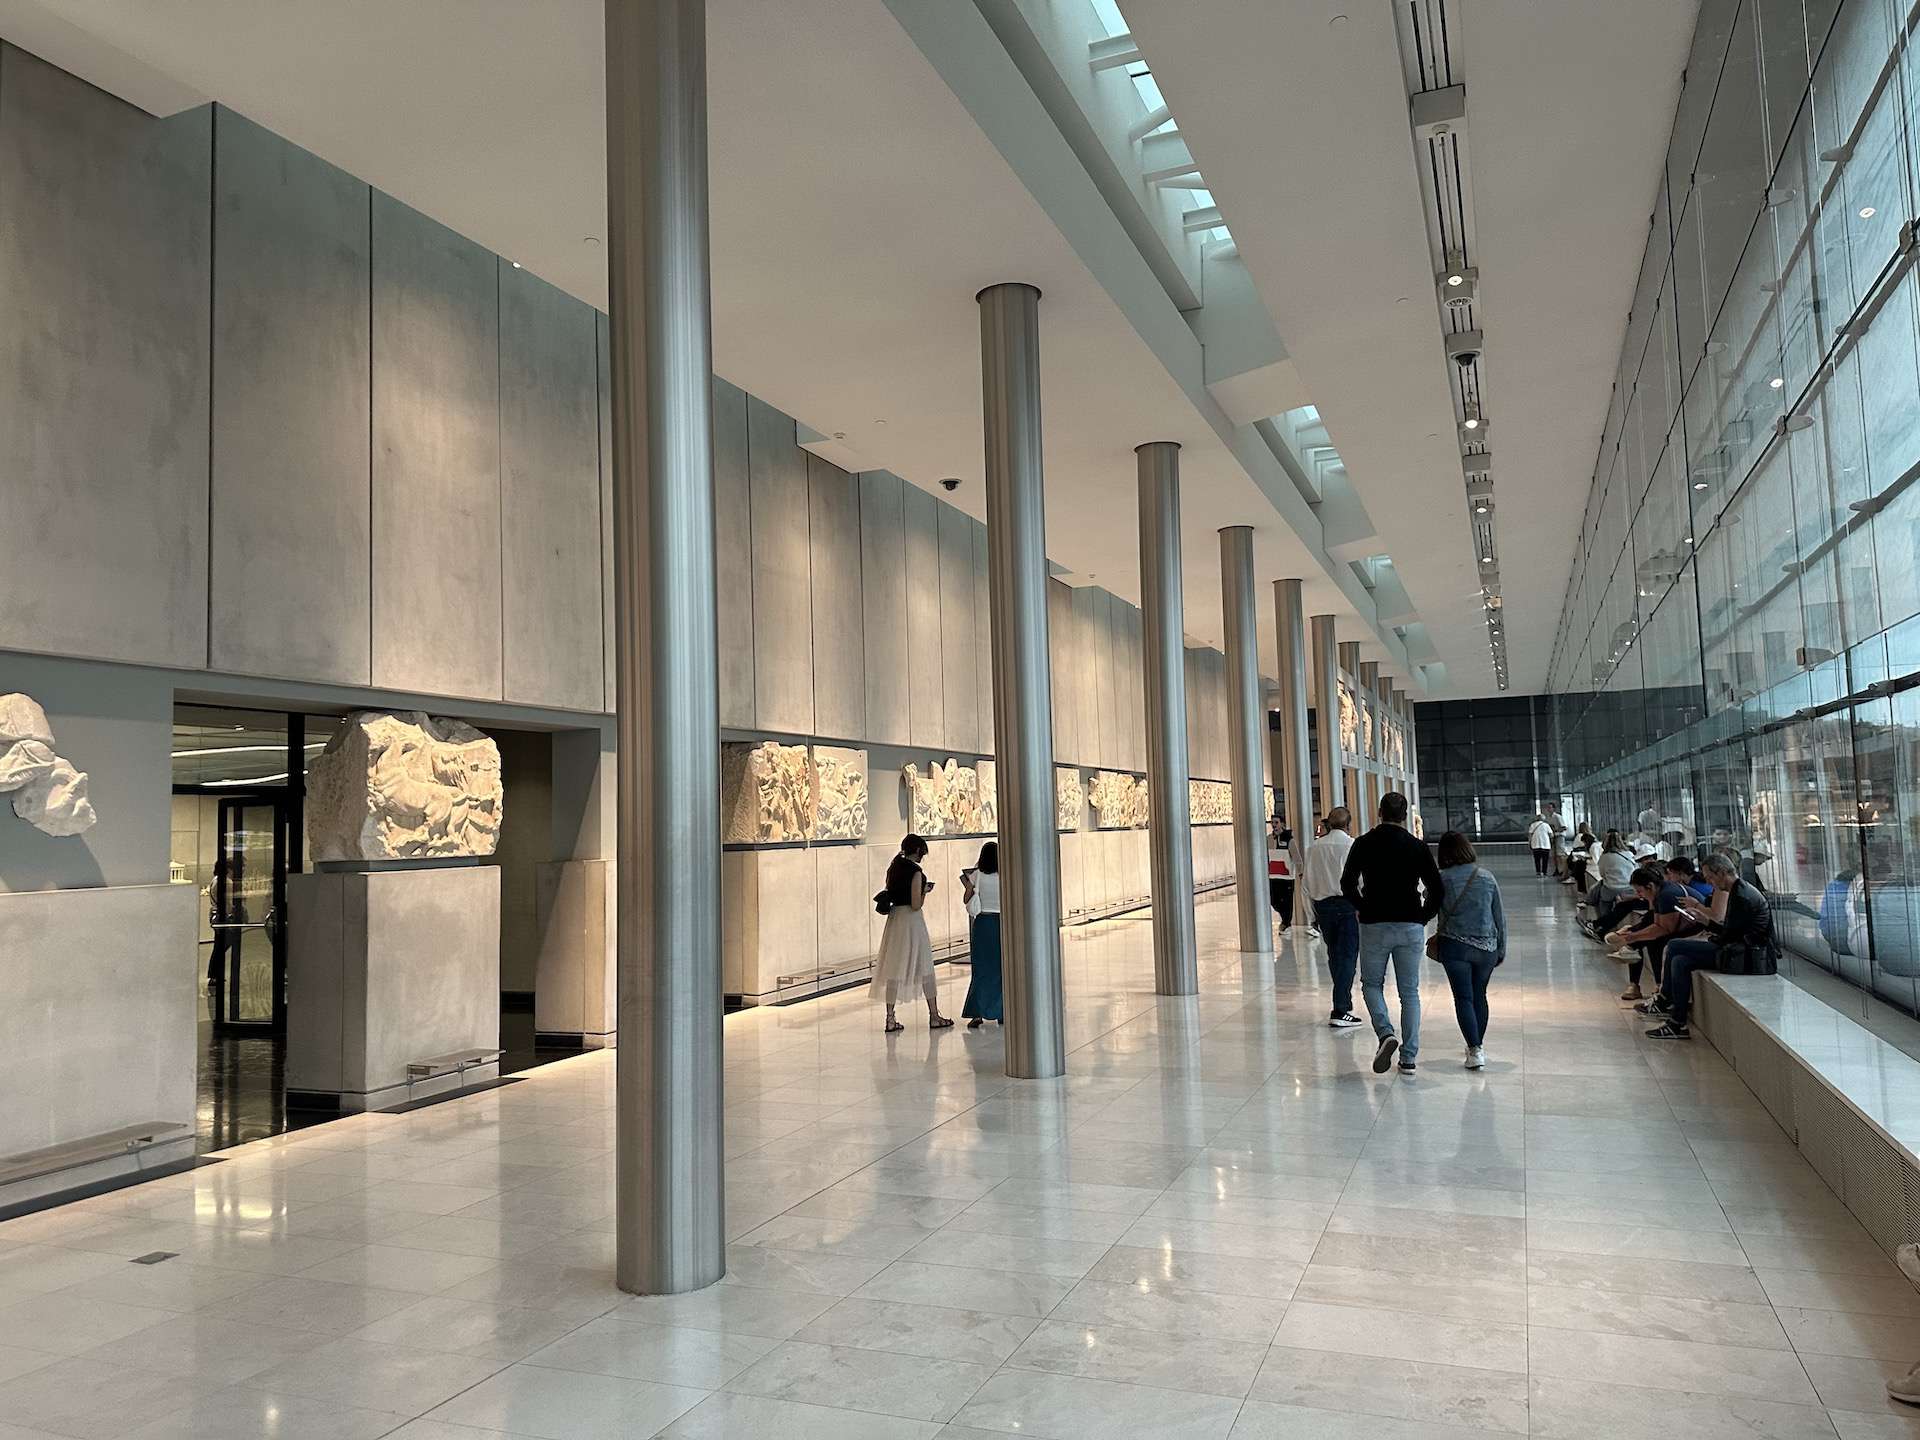 North metopes of the Parthenon at the Acropolis Museum in Athens, Greece